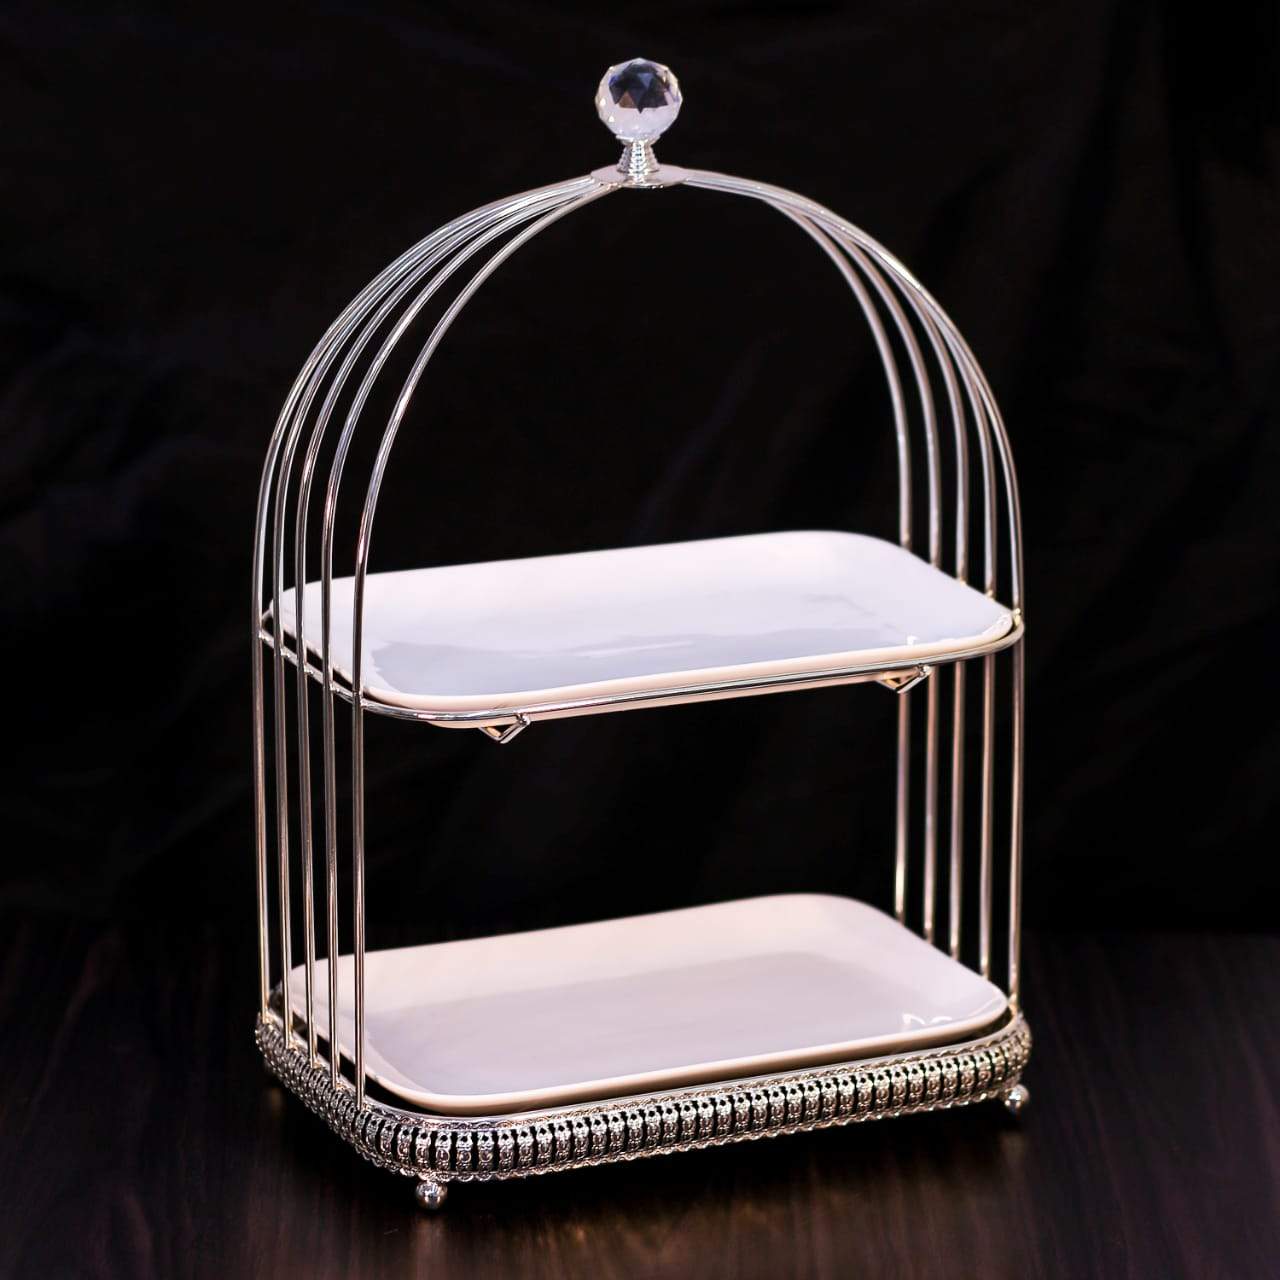 PASTRY STAND CAGE 2 TIER